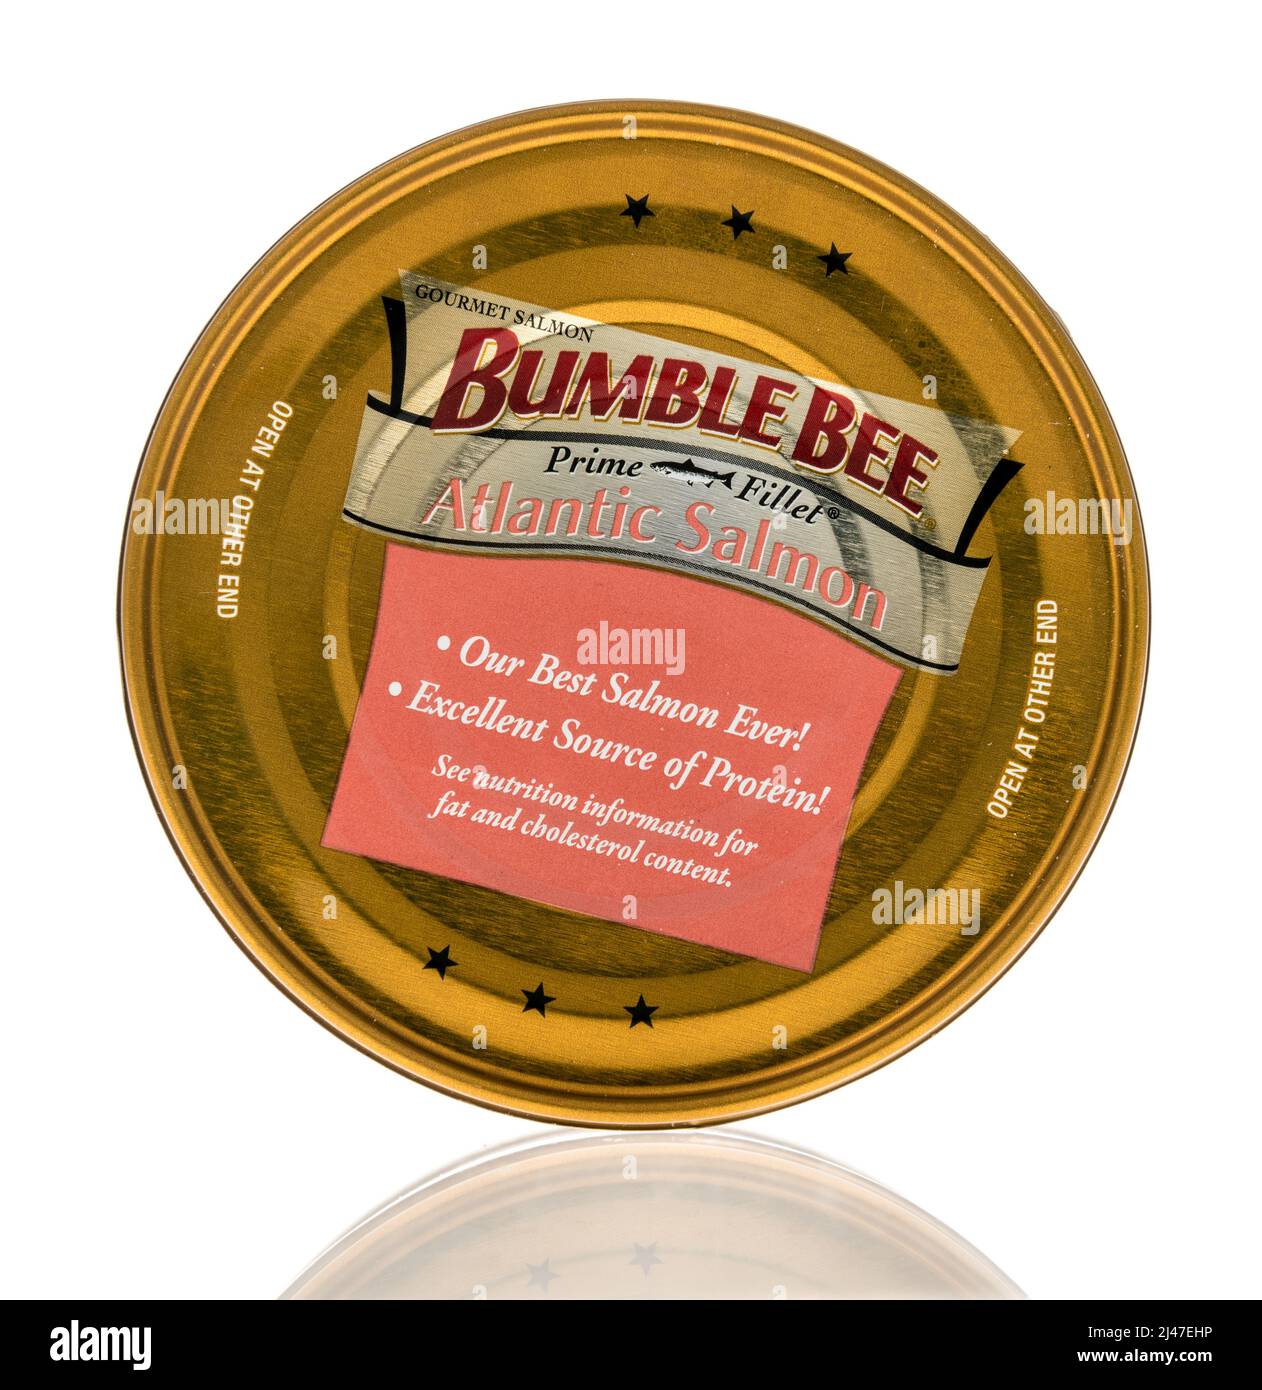 Winneconne, WI -10 April 2022: A can of Bumble bee prime fillet atlantic salmon on an isolated background Stock Photo